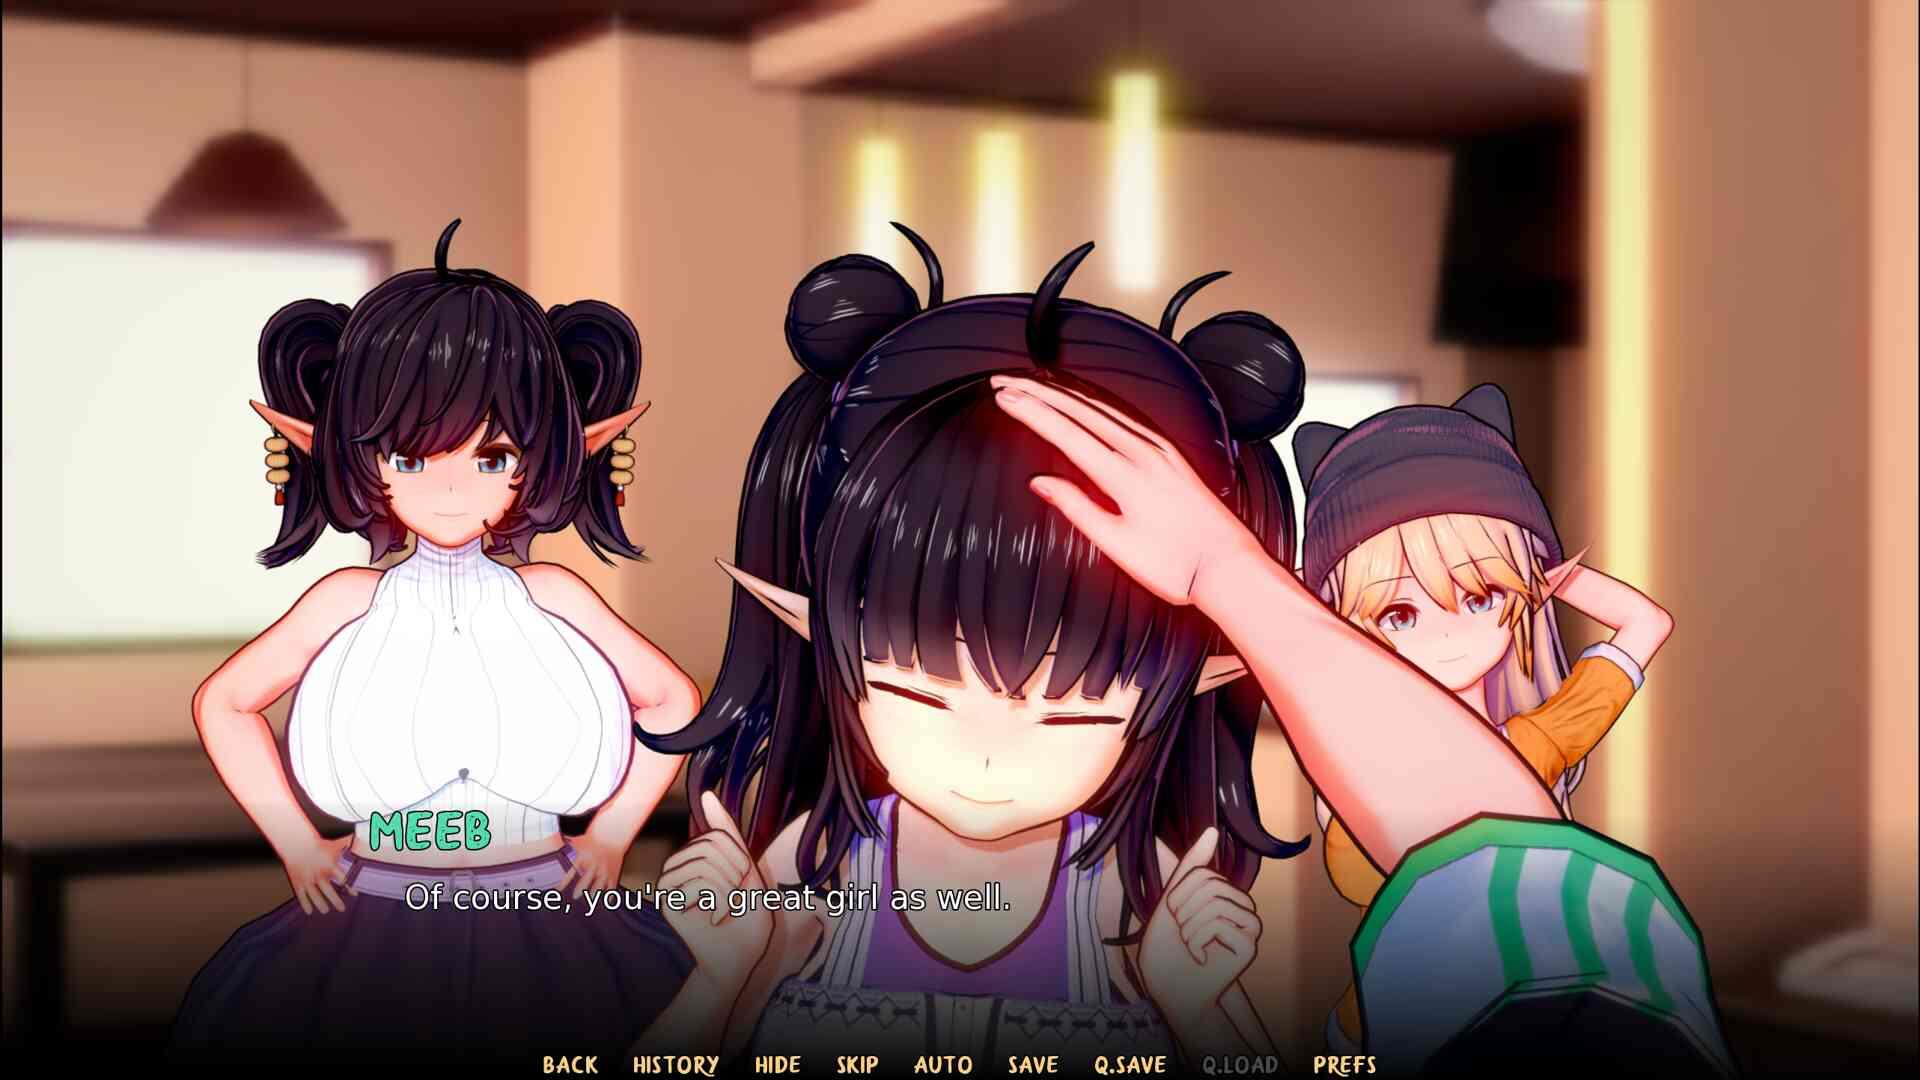 Perfect Family: A Family of Perverts Screenshot 1